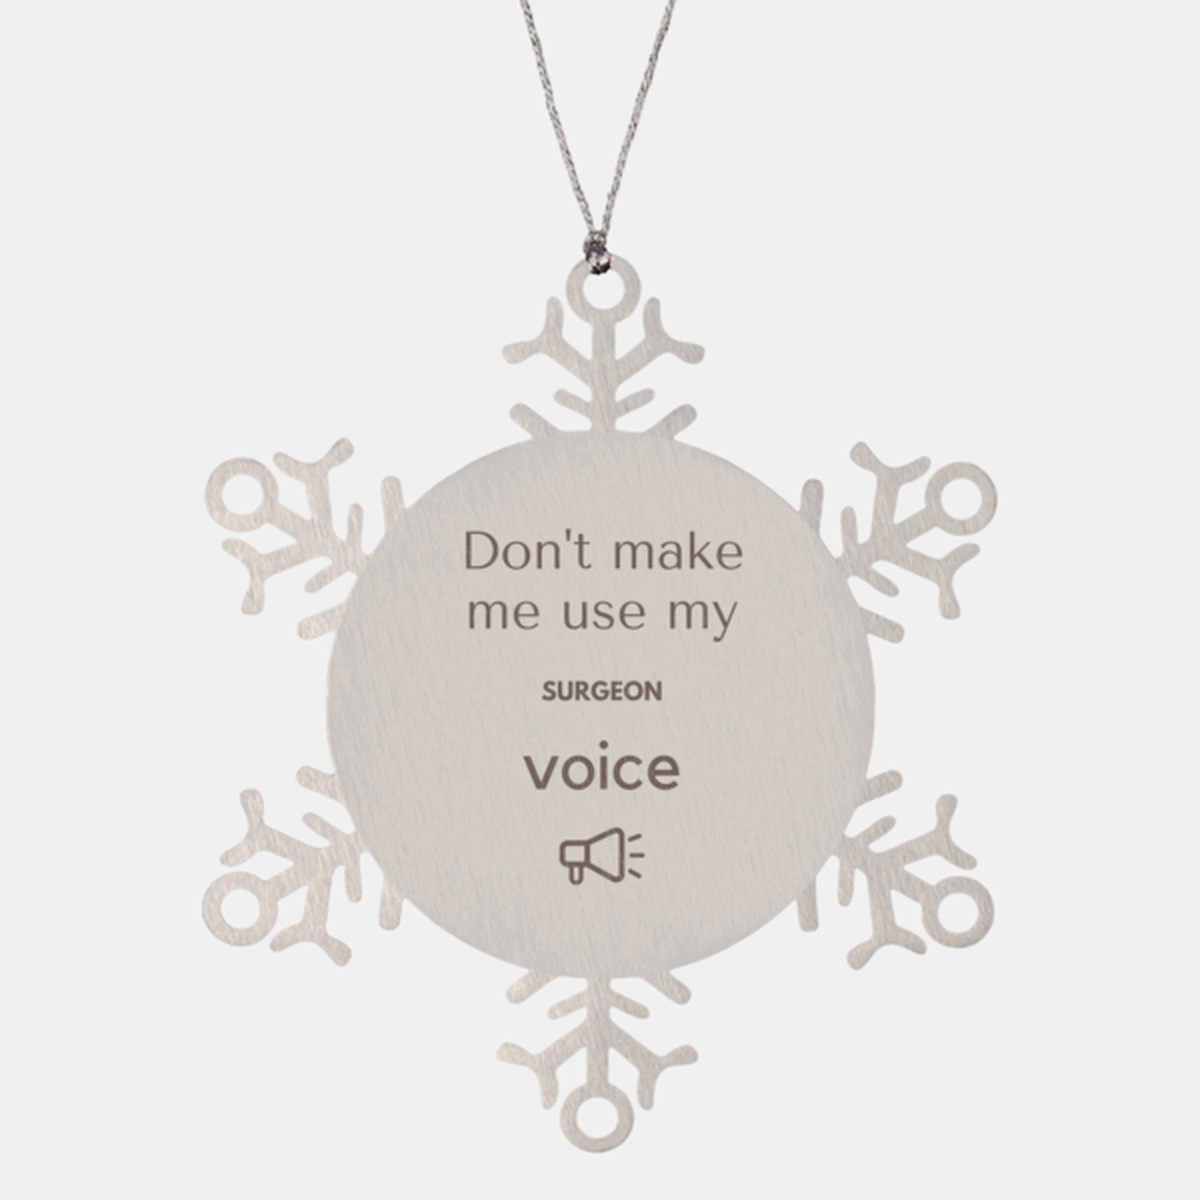 Don't make me use my Surgeon voice, Sarcasm Surgeon Ornament Gifts, Christmas Surgeon Snowflake Ornament Unique Gifts For Surgeon Coworkers, Men, Women, Colleague, Friends